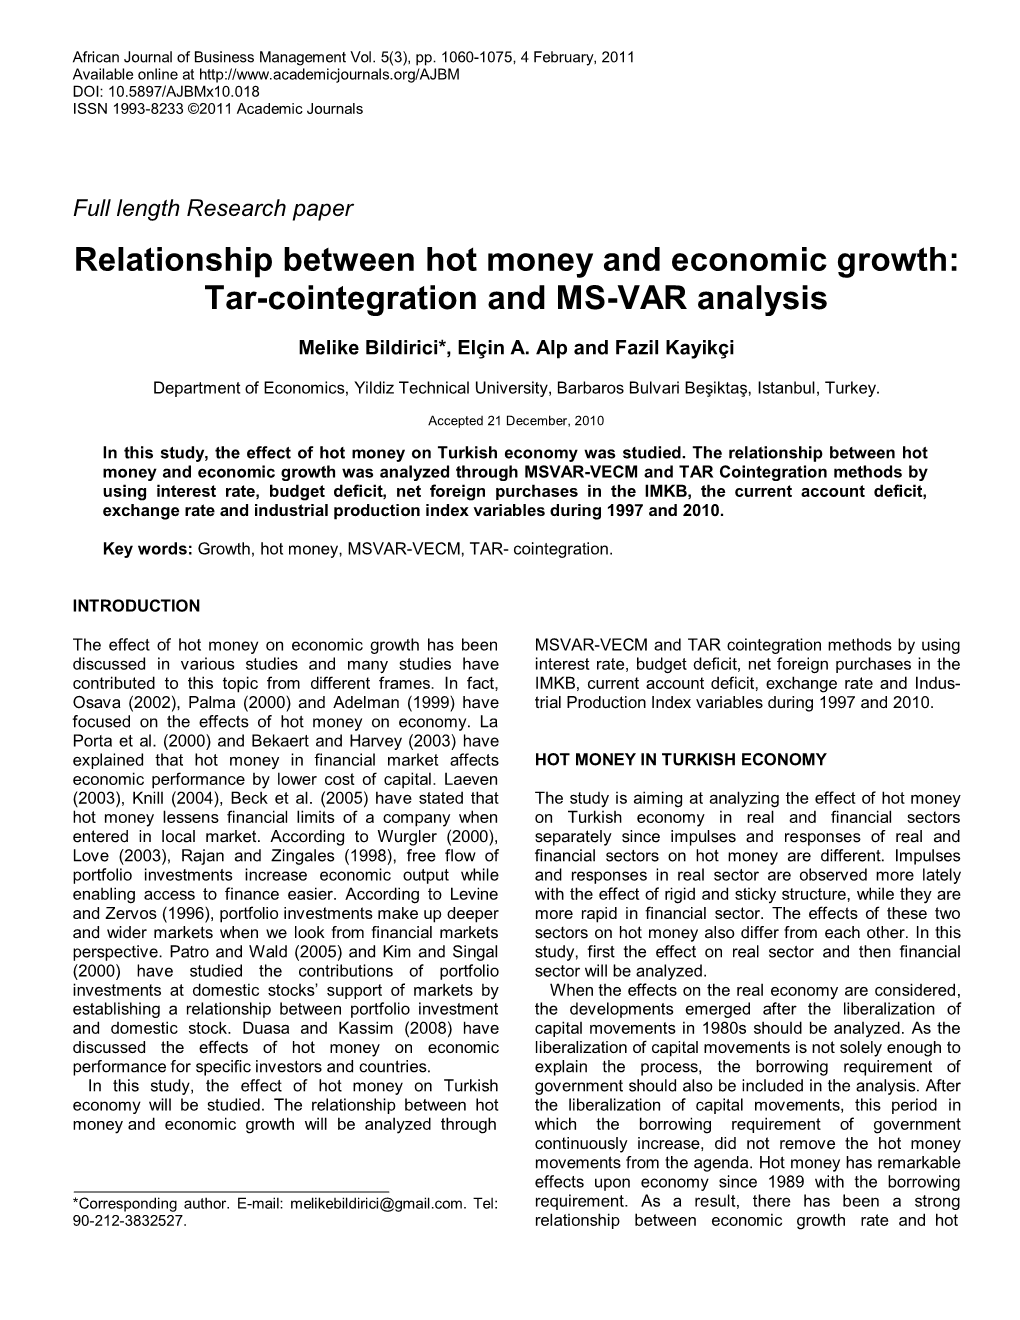 Relationship Between Hot Money and Economic Growth: Tar-Cointegration and MS-VAR Analysis